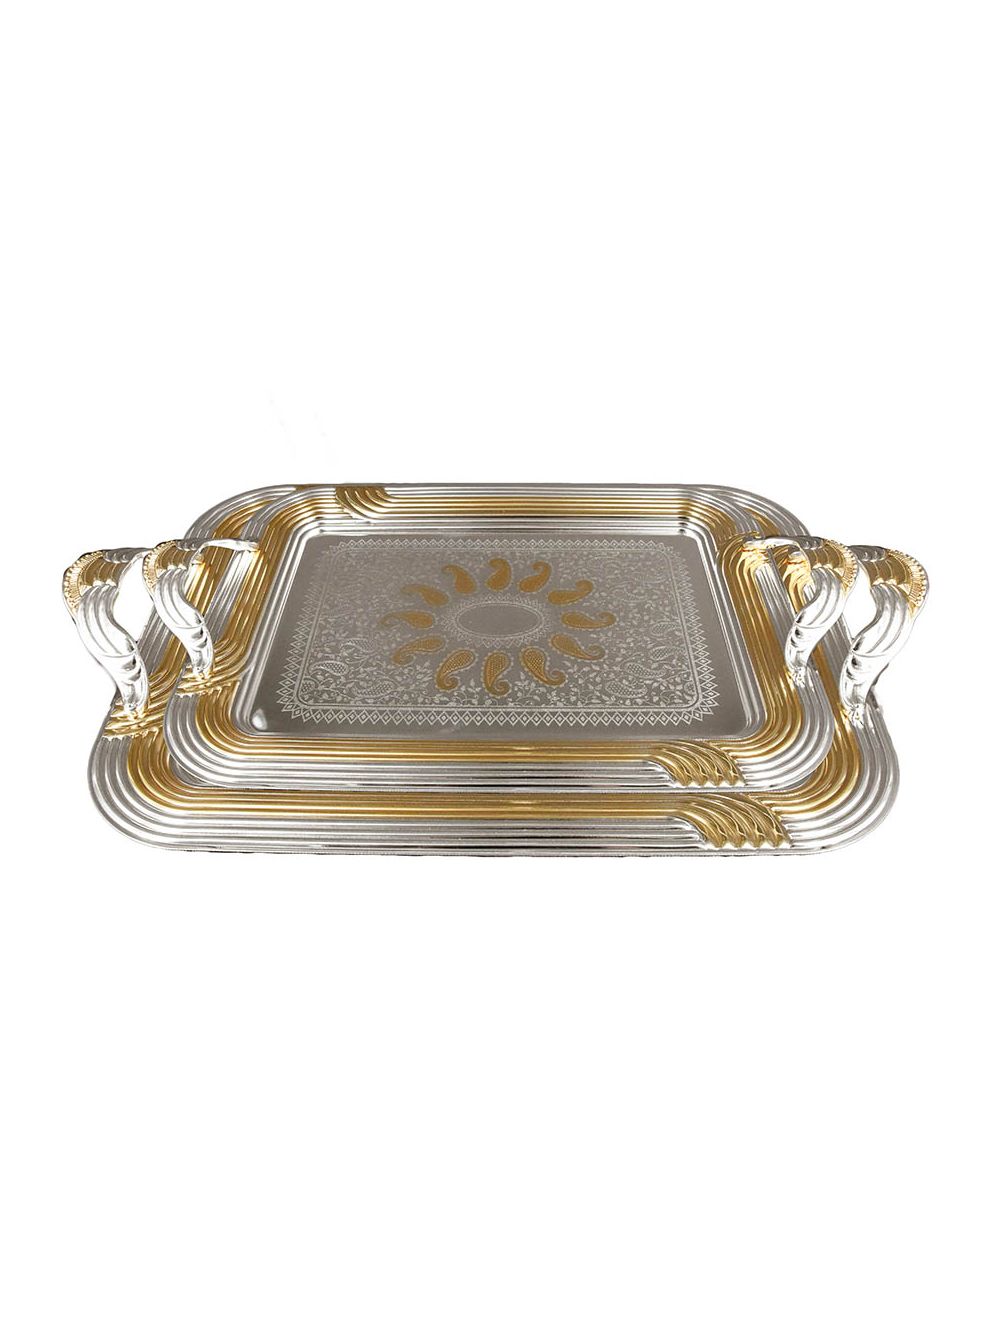 Serving Tray Acrylic Silver and Gold Plated Design 